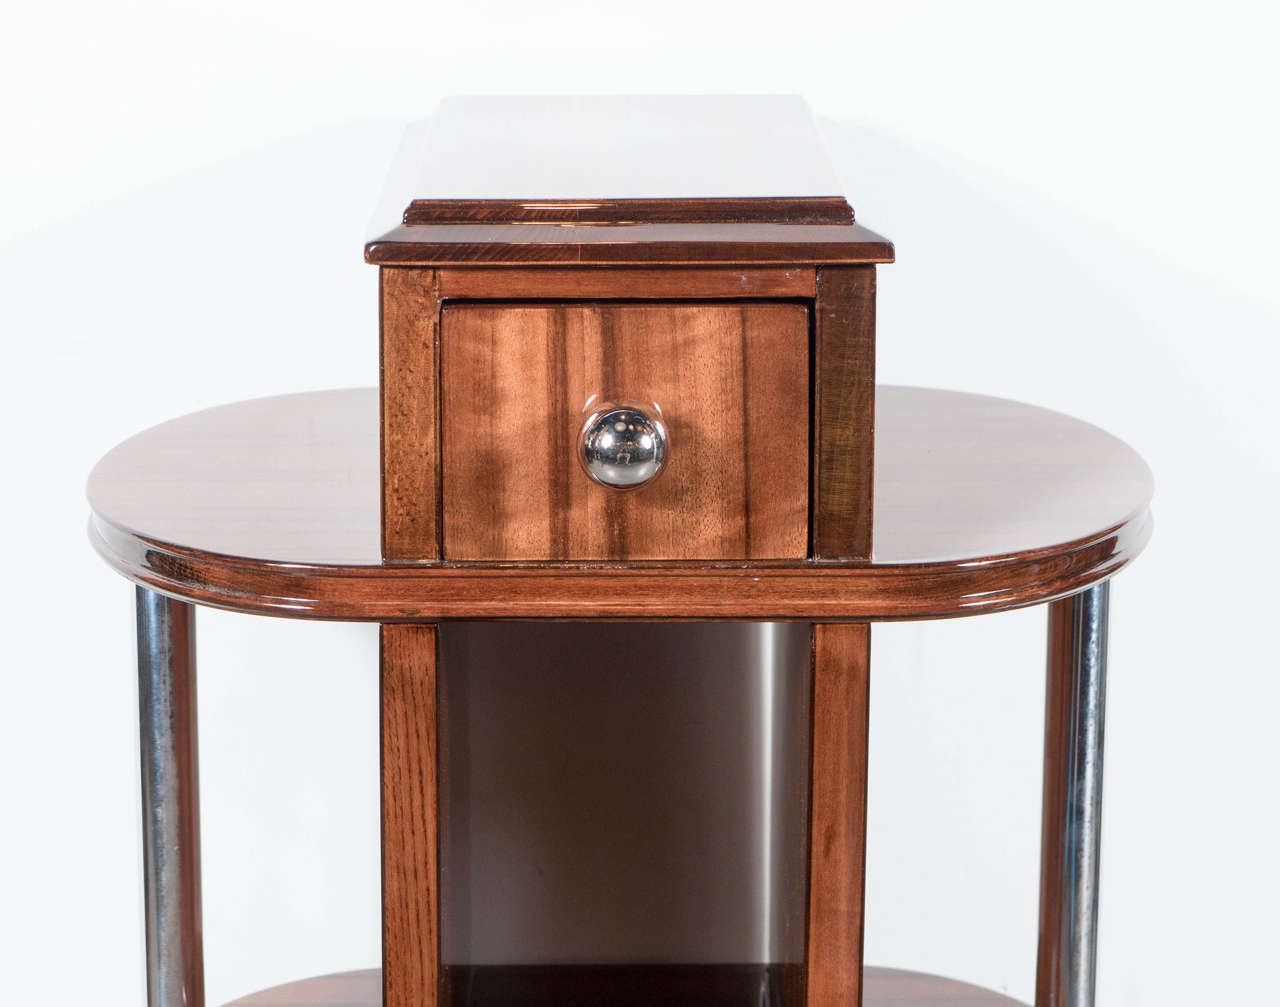 American Art Deco Multi-Tier Occasional Table in the Manner of Donald Deskey